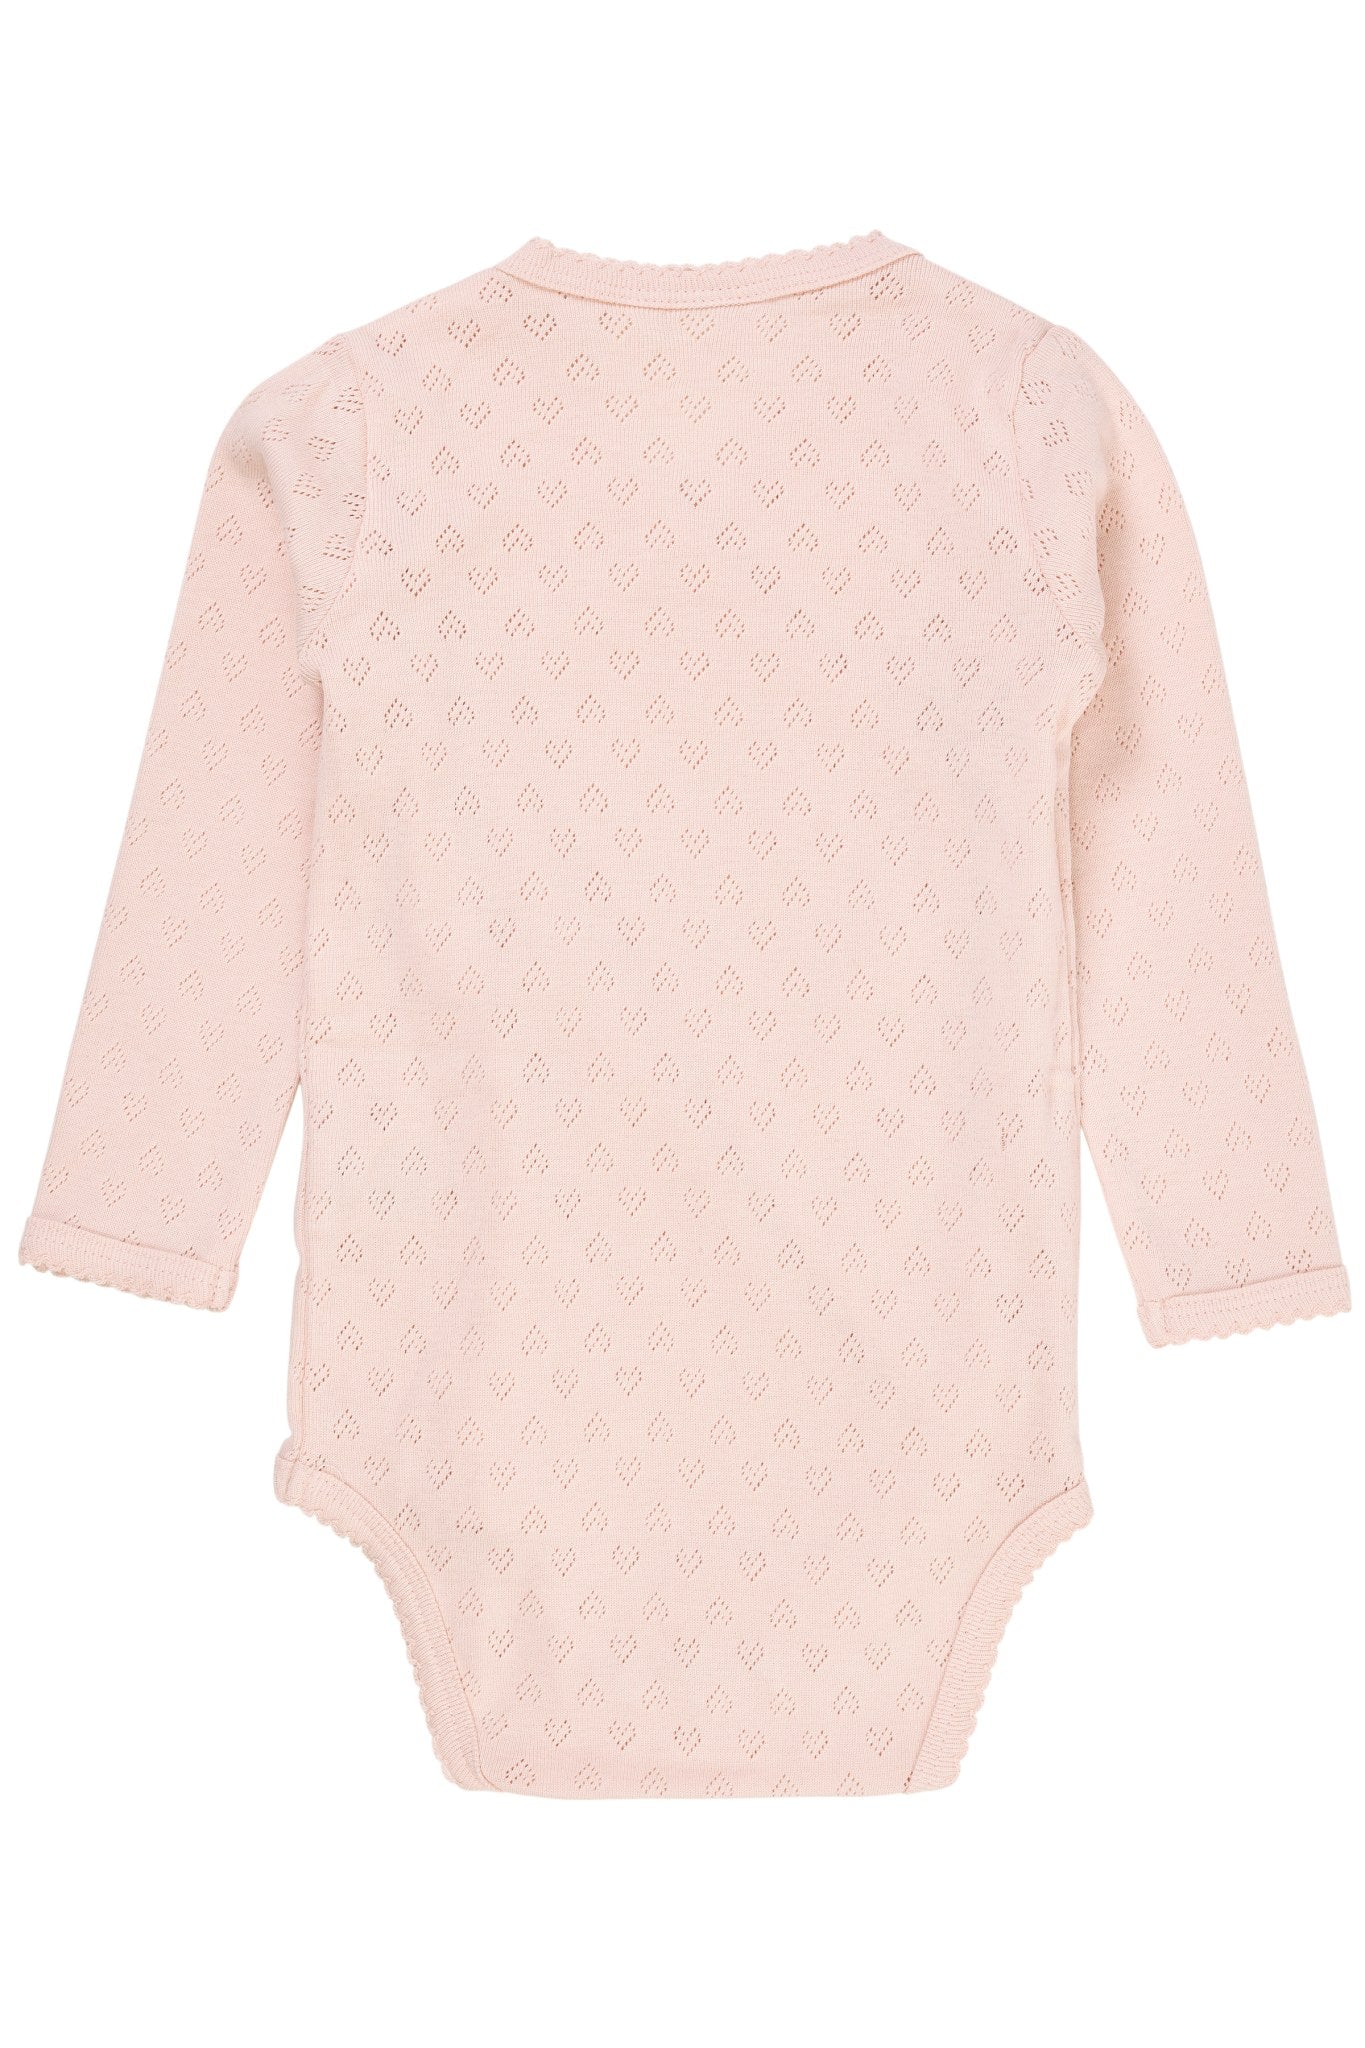 POINTELLE HEART CROSSOVER BODY LS - DUSTY ROSE